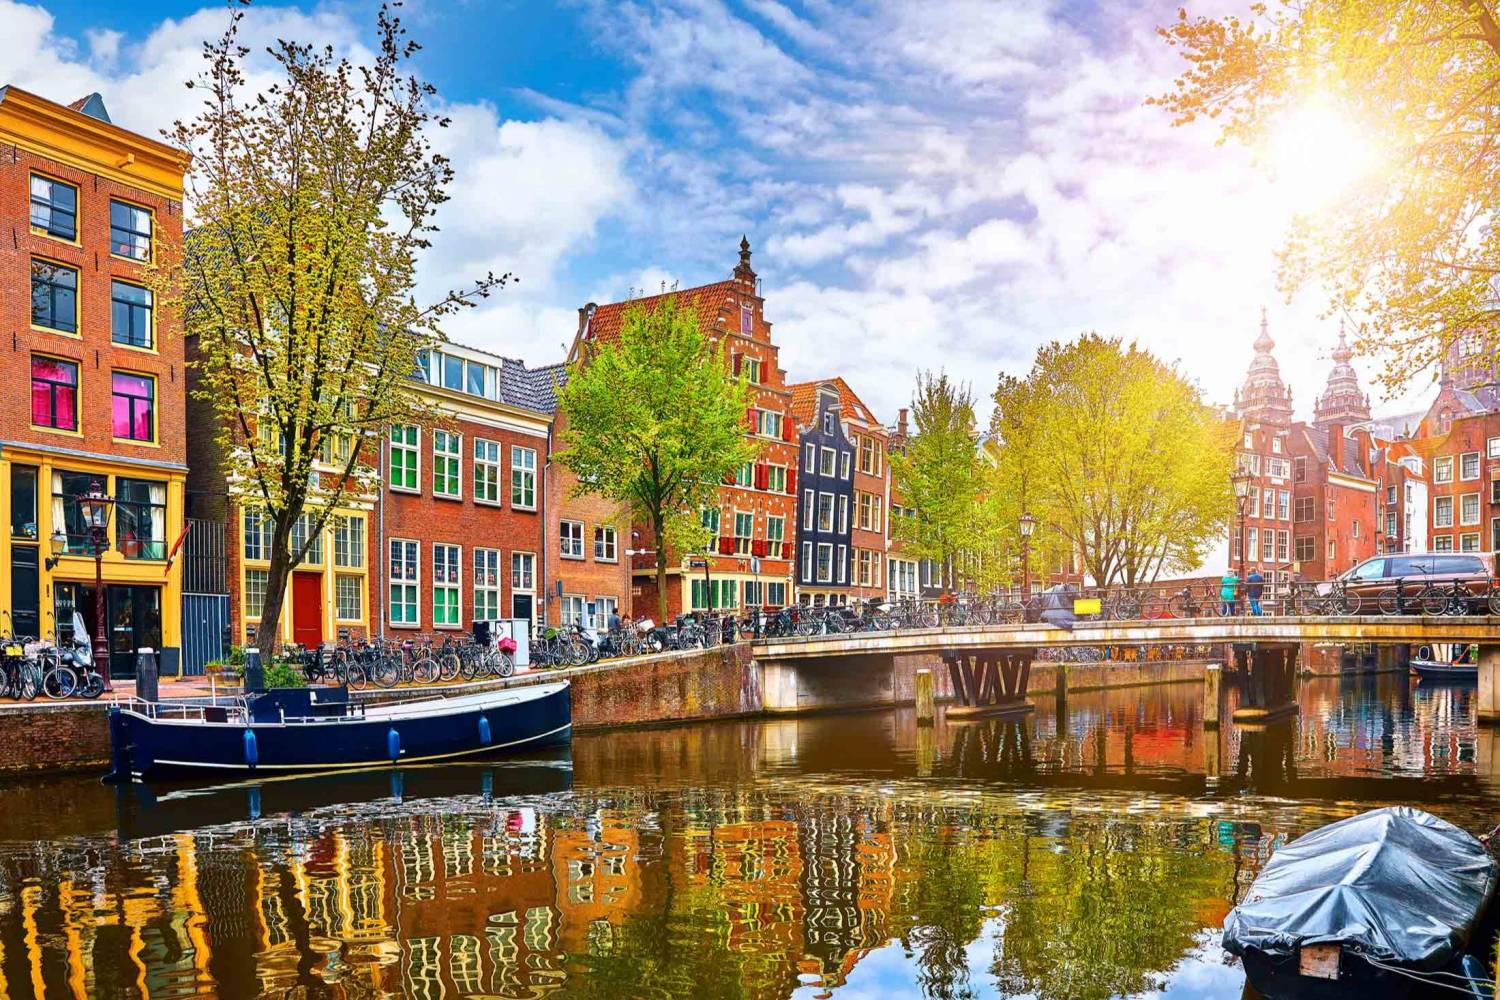 Canals in Amsterdam - Take a Chef